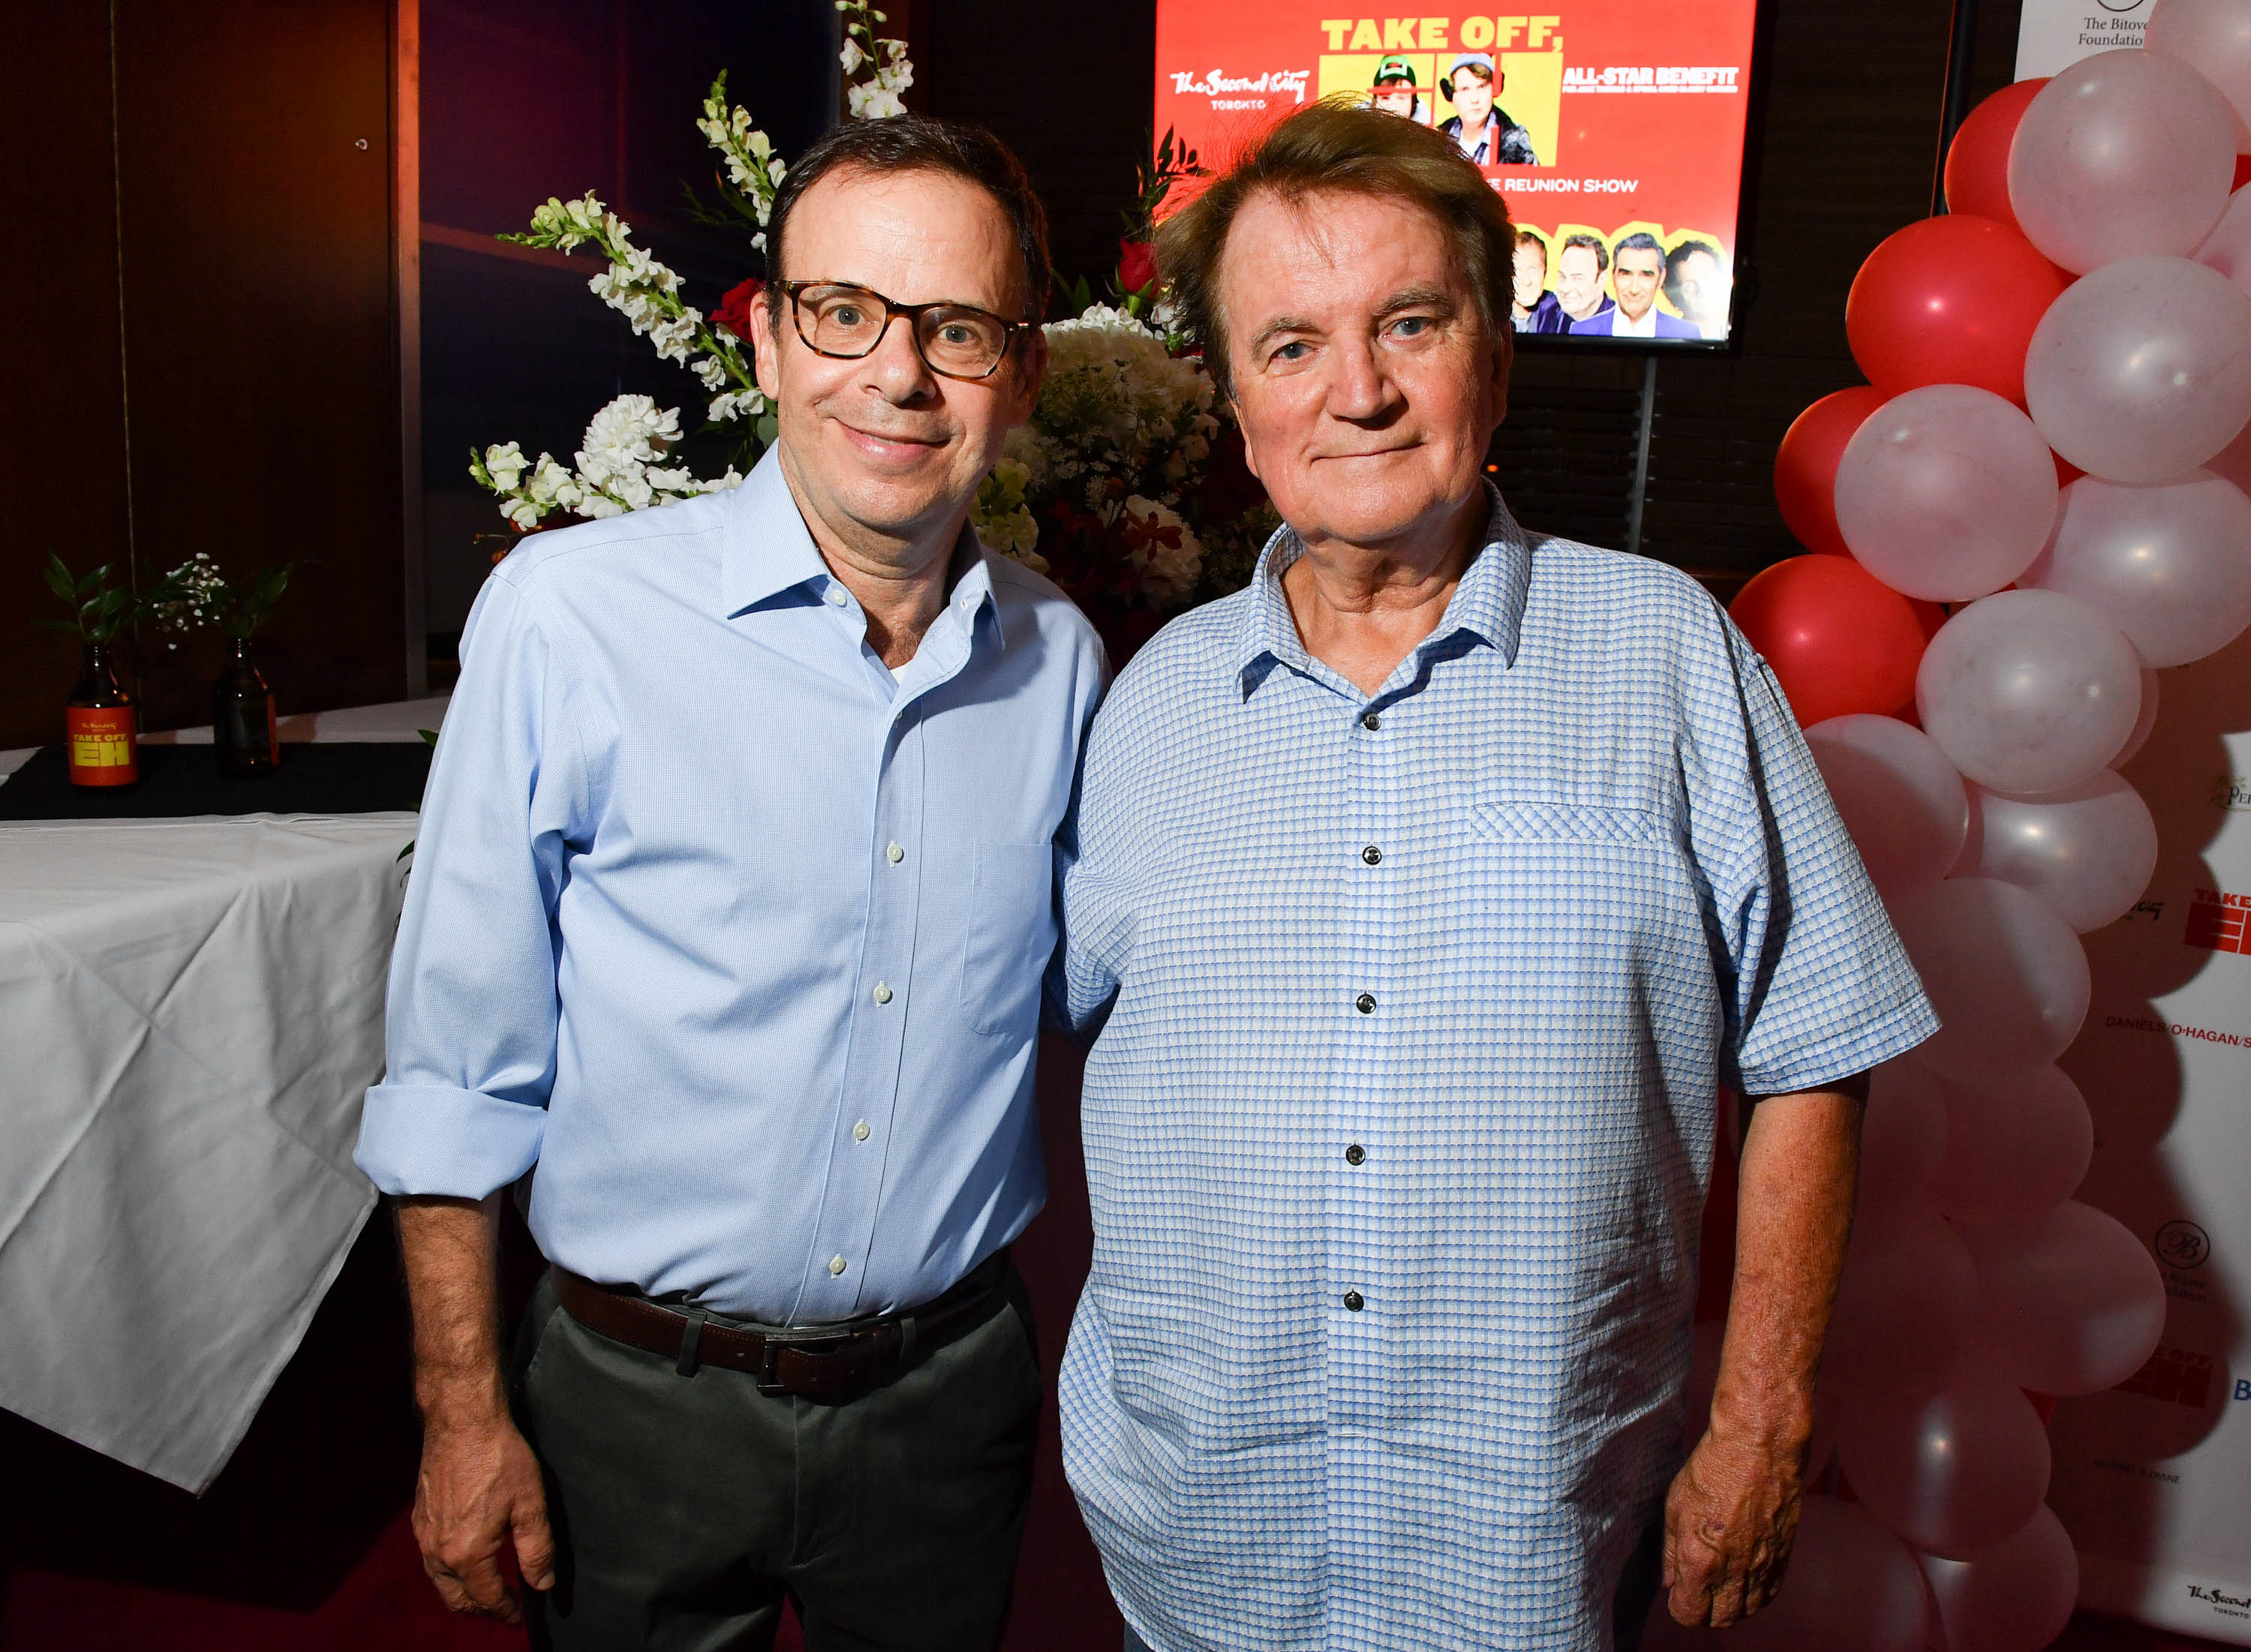 Rick Moranis and Dave Thomas attend the Dave Thomas and the Second City Present "Take Off, EH!" An All-Star Benefit after party at Wayne Gretzky's on July 18, 2017 in Toronto, Canada. | Source: Getty Images